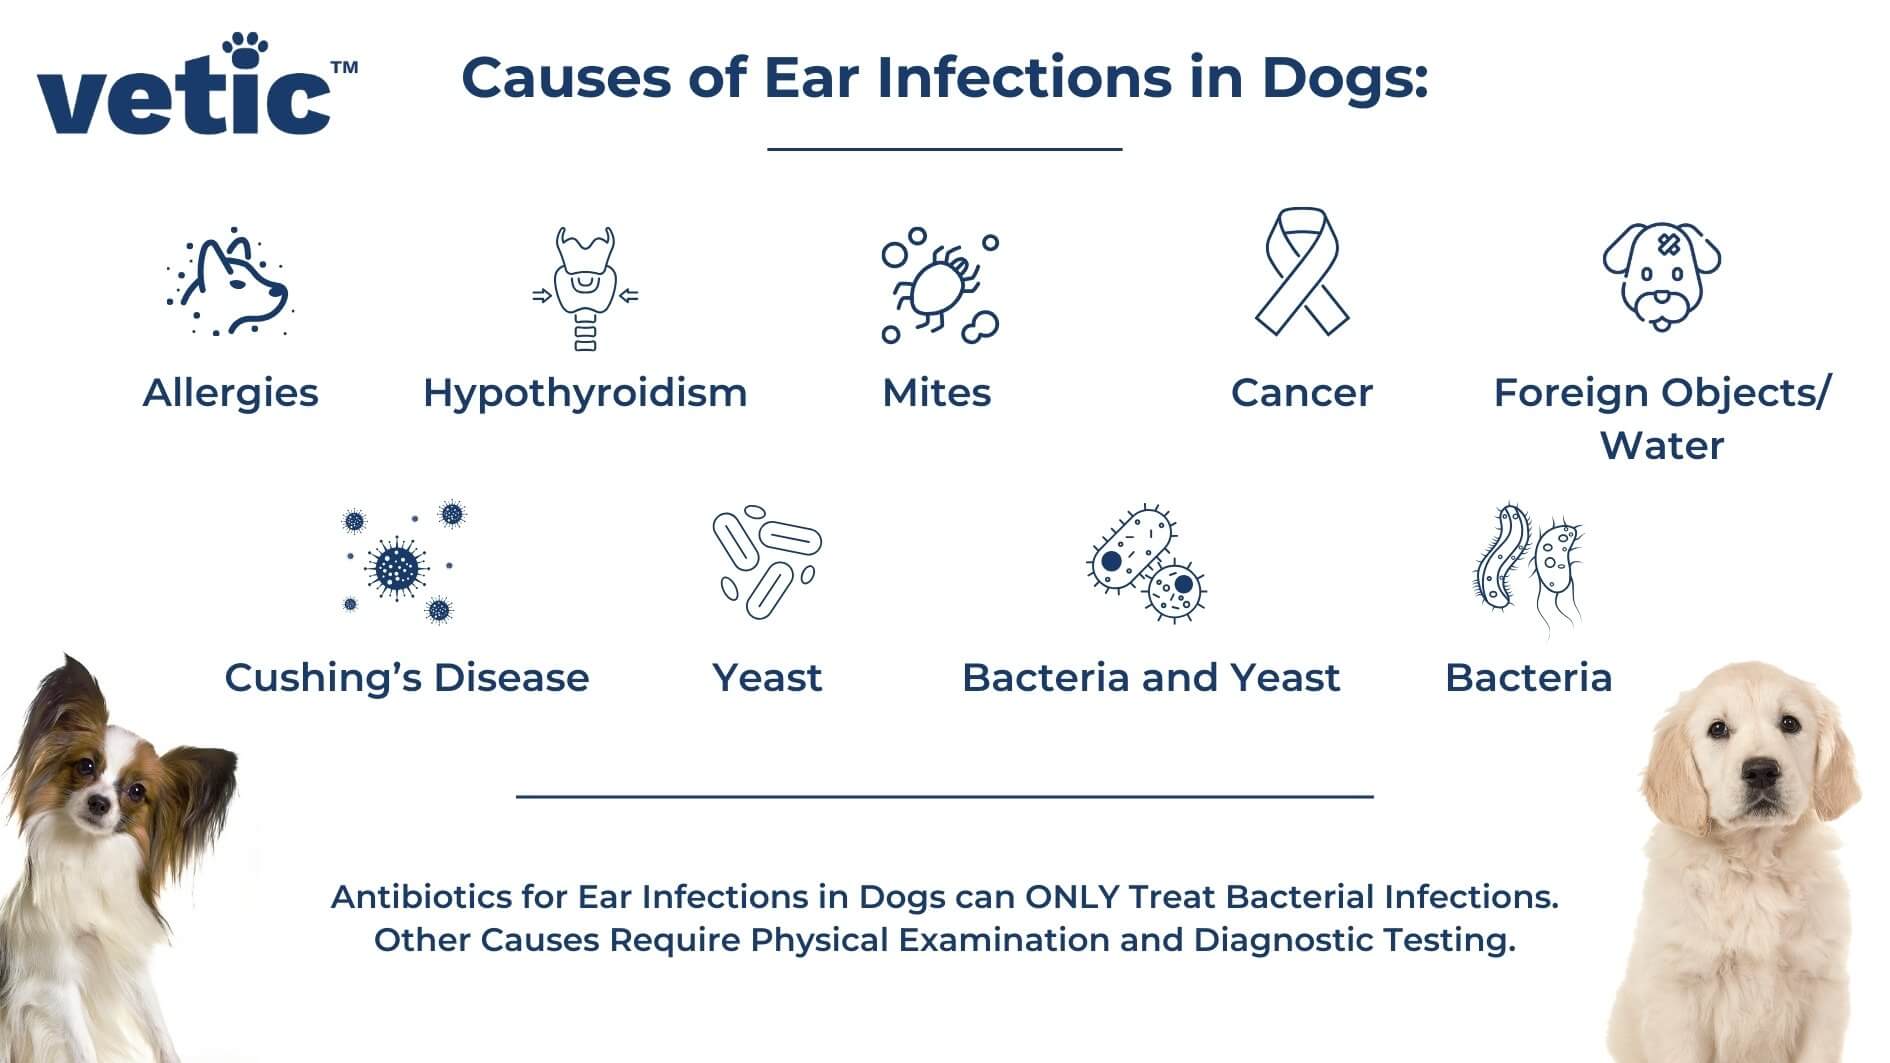 Infographic on antibiotics for dogs ear infection - Causes of Ear Infections in Dogs: Allergies Hypothyroidism Foreign Objects/ Water Mites Cancer Cushing’s Disease Yeast Bacteria and Yeast Bacteria Antibiotics for Ear Infections in Dogs can ONLY Treat Bacterial Infections. Other Causes Require Physical Examination and Diagnostic Testing.